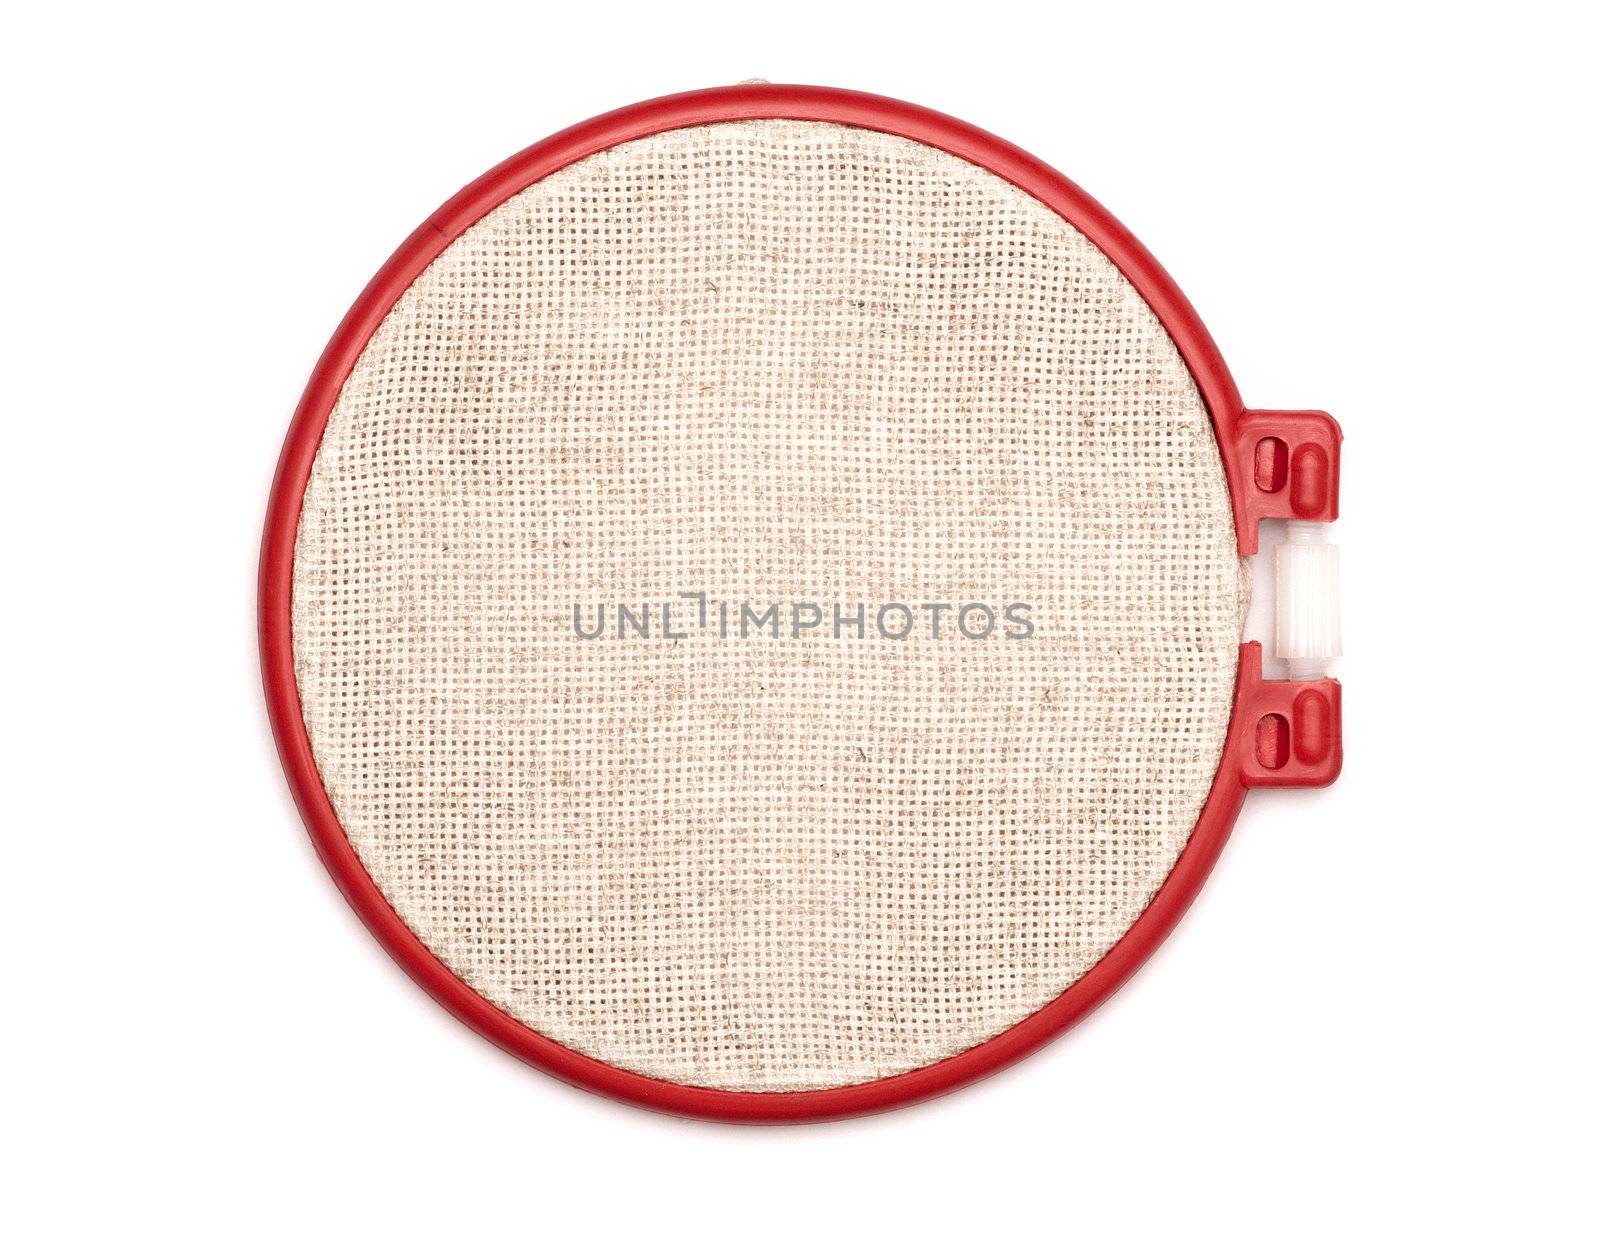 The embroidery hoop is on the white background